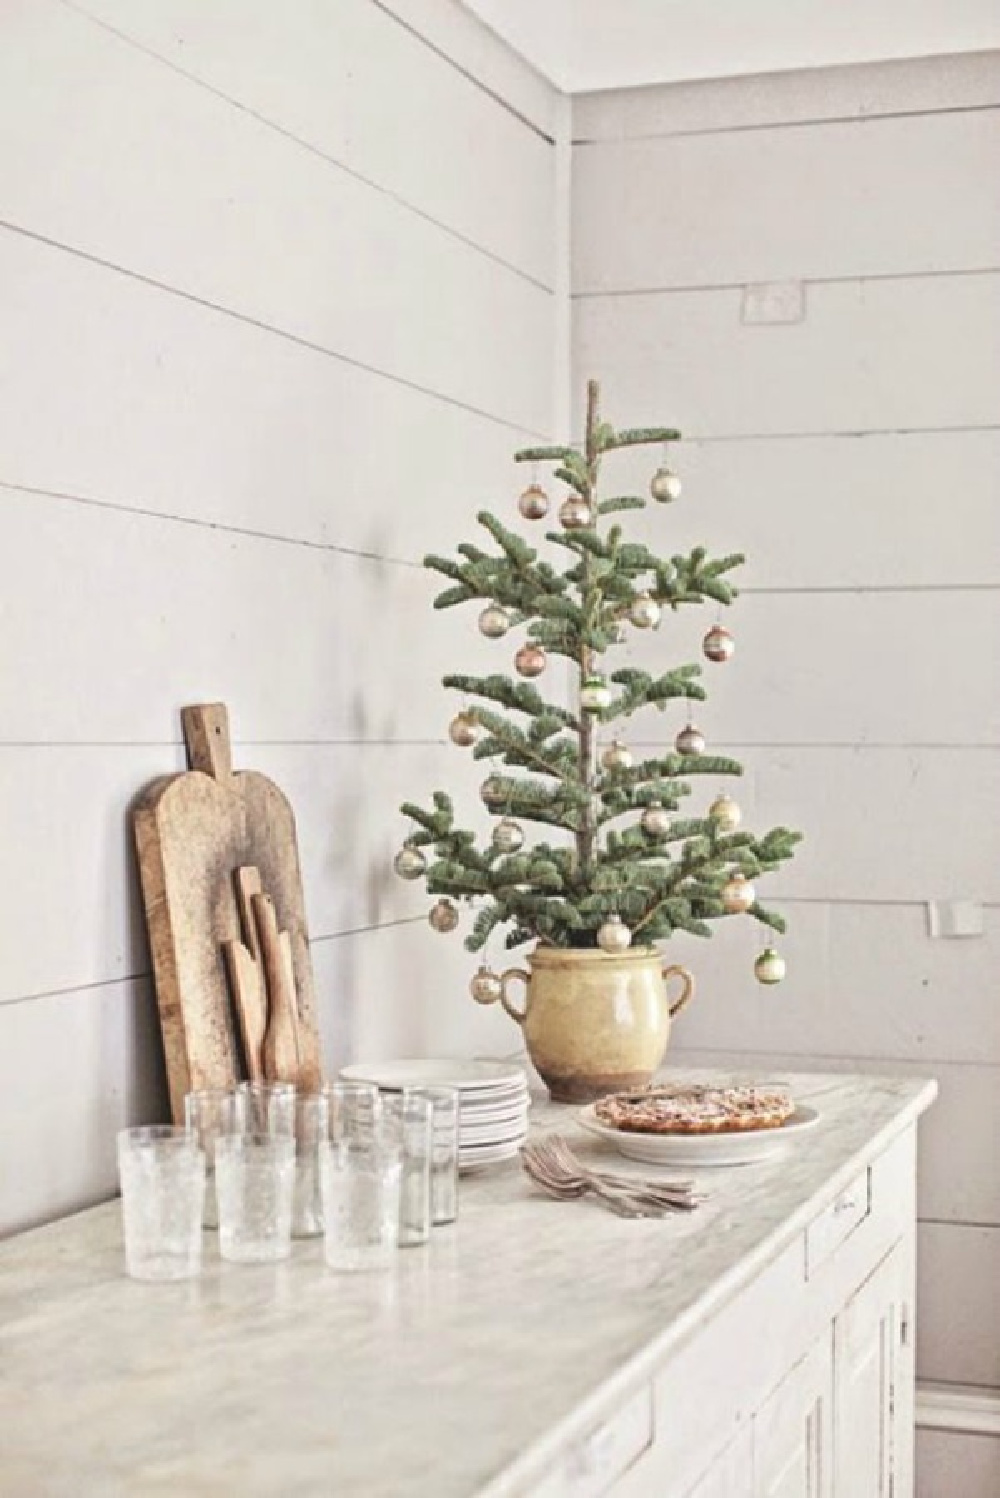 French farmhouse Christmas decor in a white room with shiplap and vintage - DreamyWhites. #frenchchristmas #frenchfarmhouse #christmsadesocr #vintagechristmas